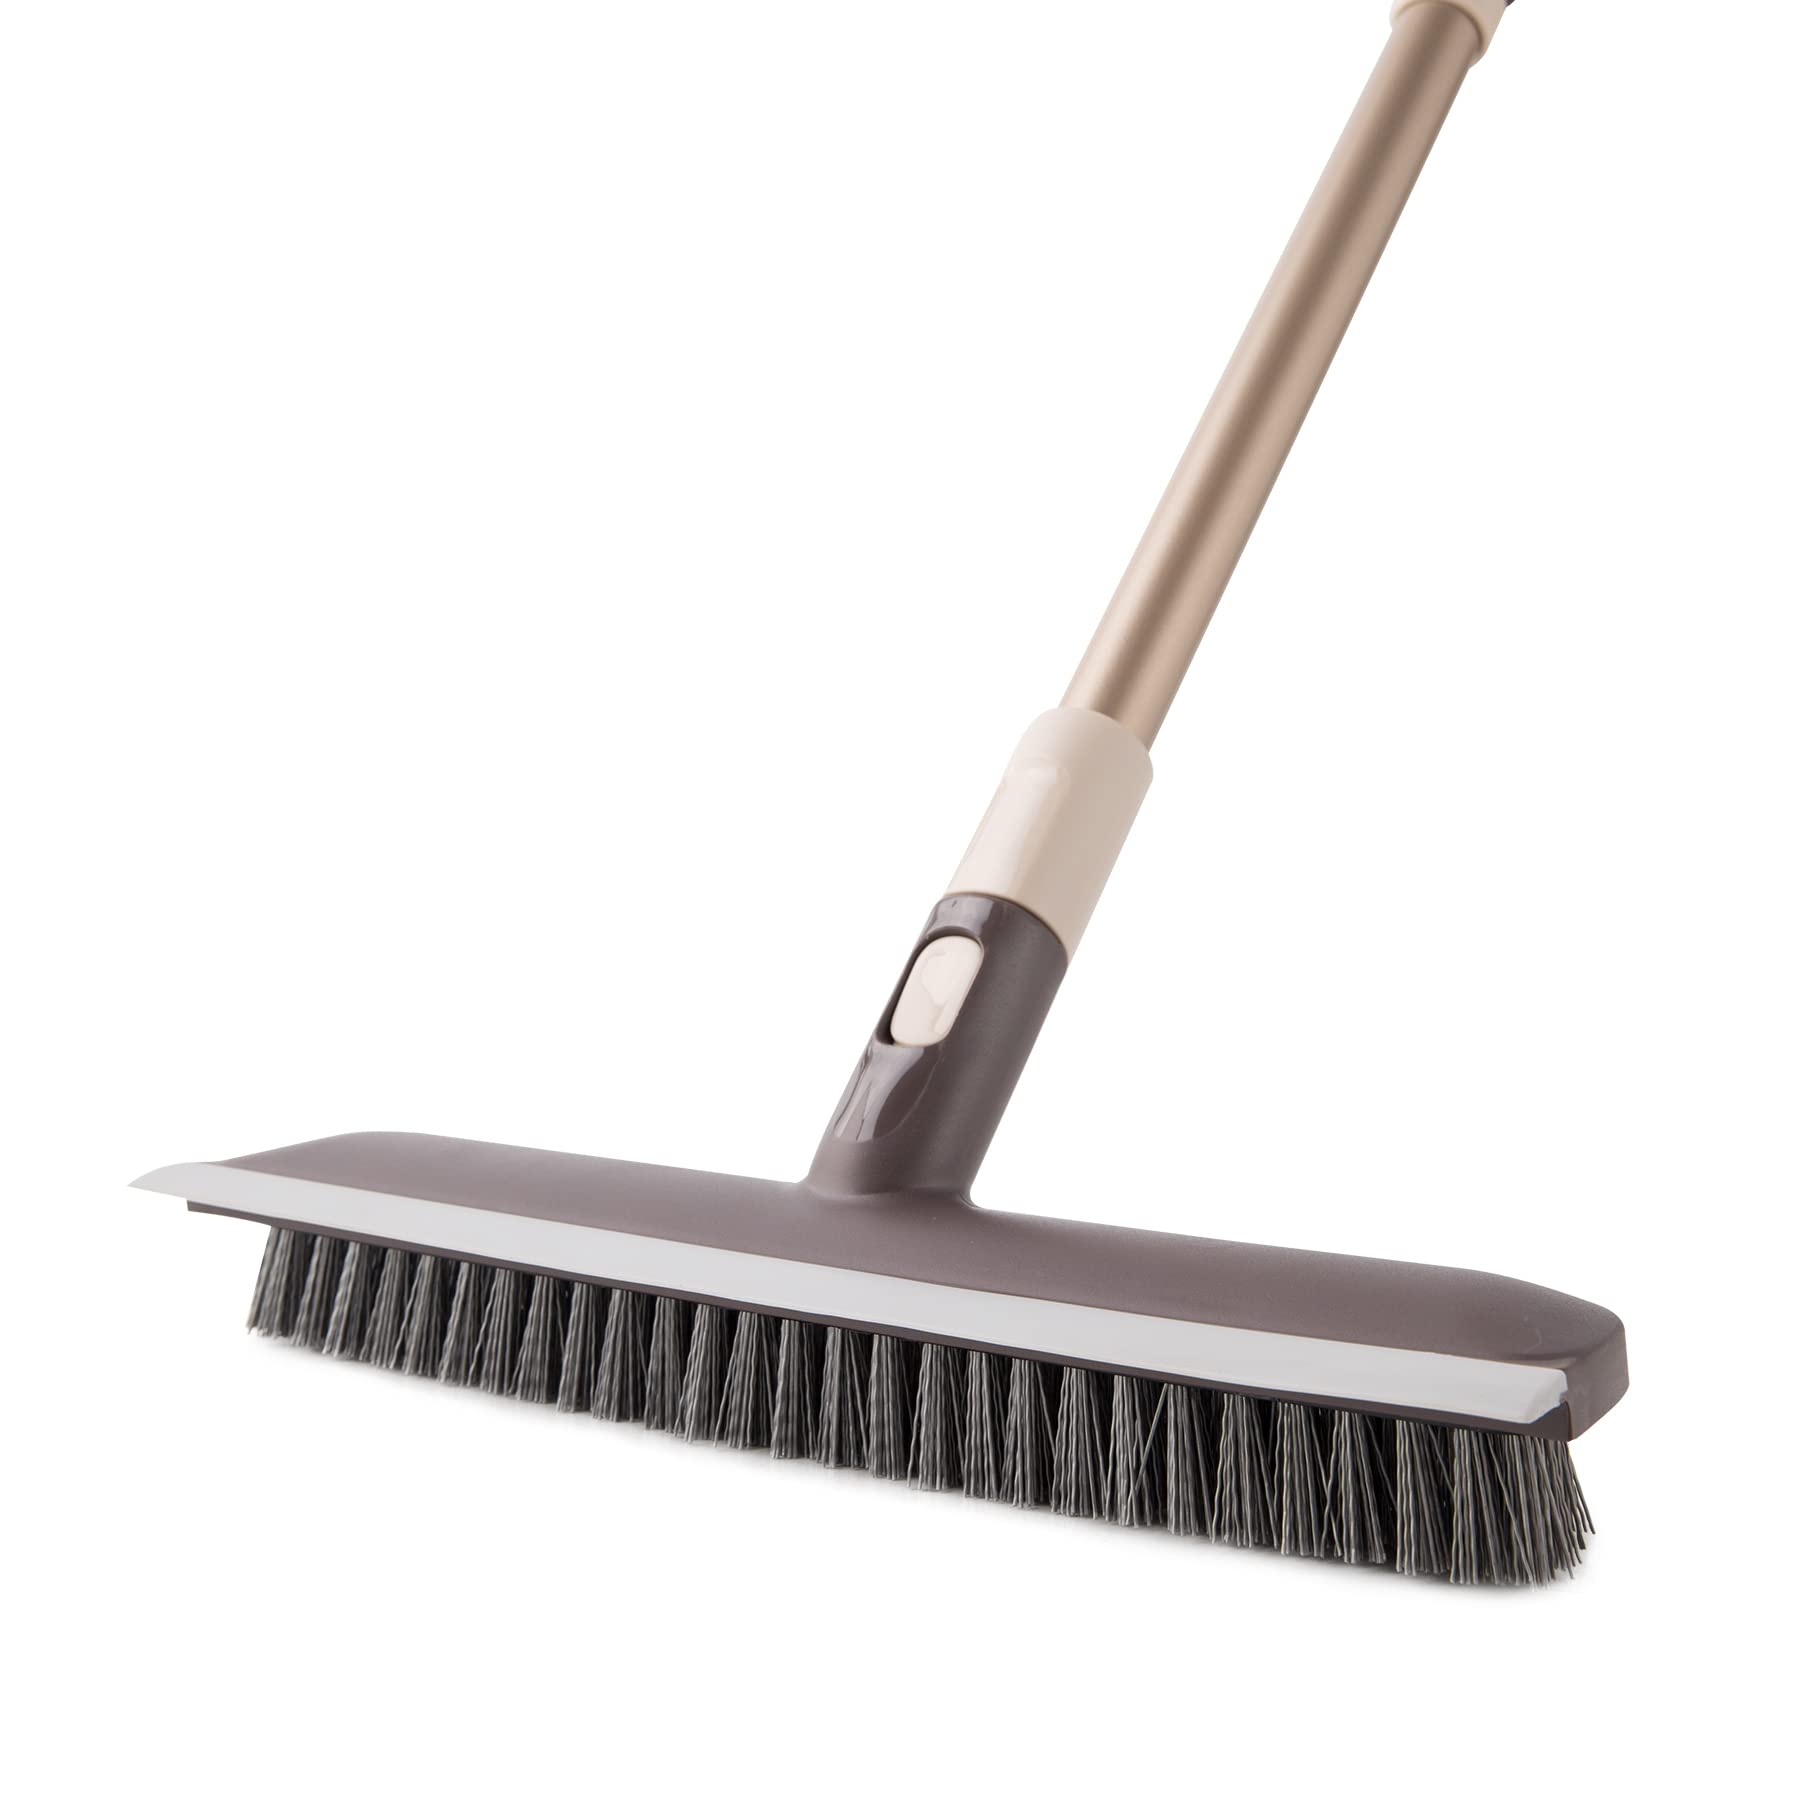 Eyliden Tub Scrubber Brush with Long Handle, 2 in 1 Tub and Tile Clean